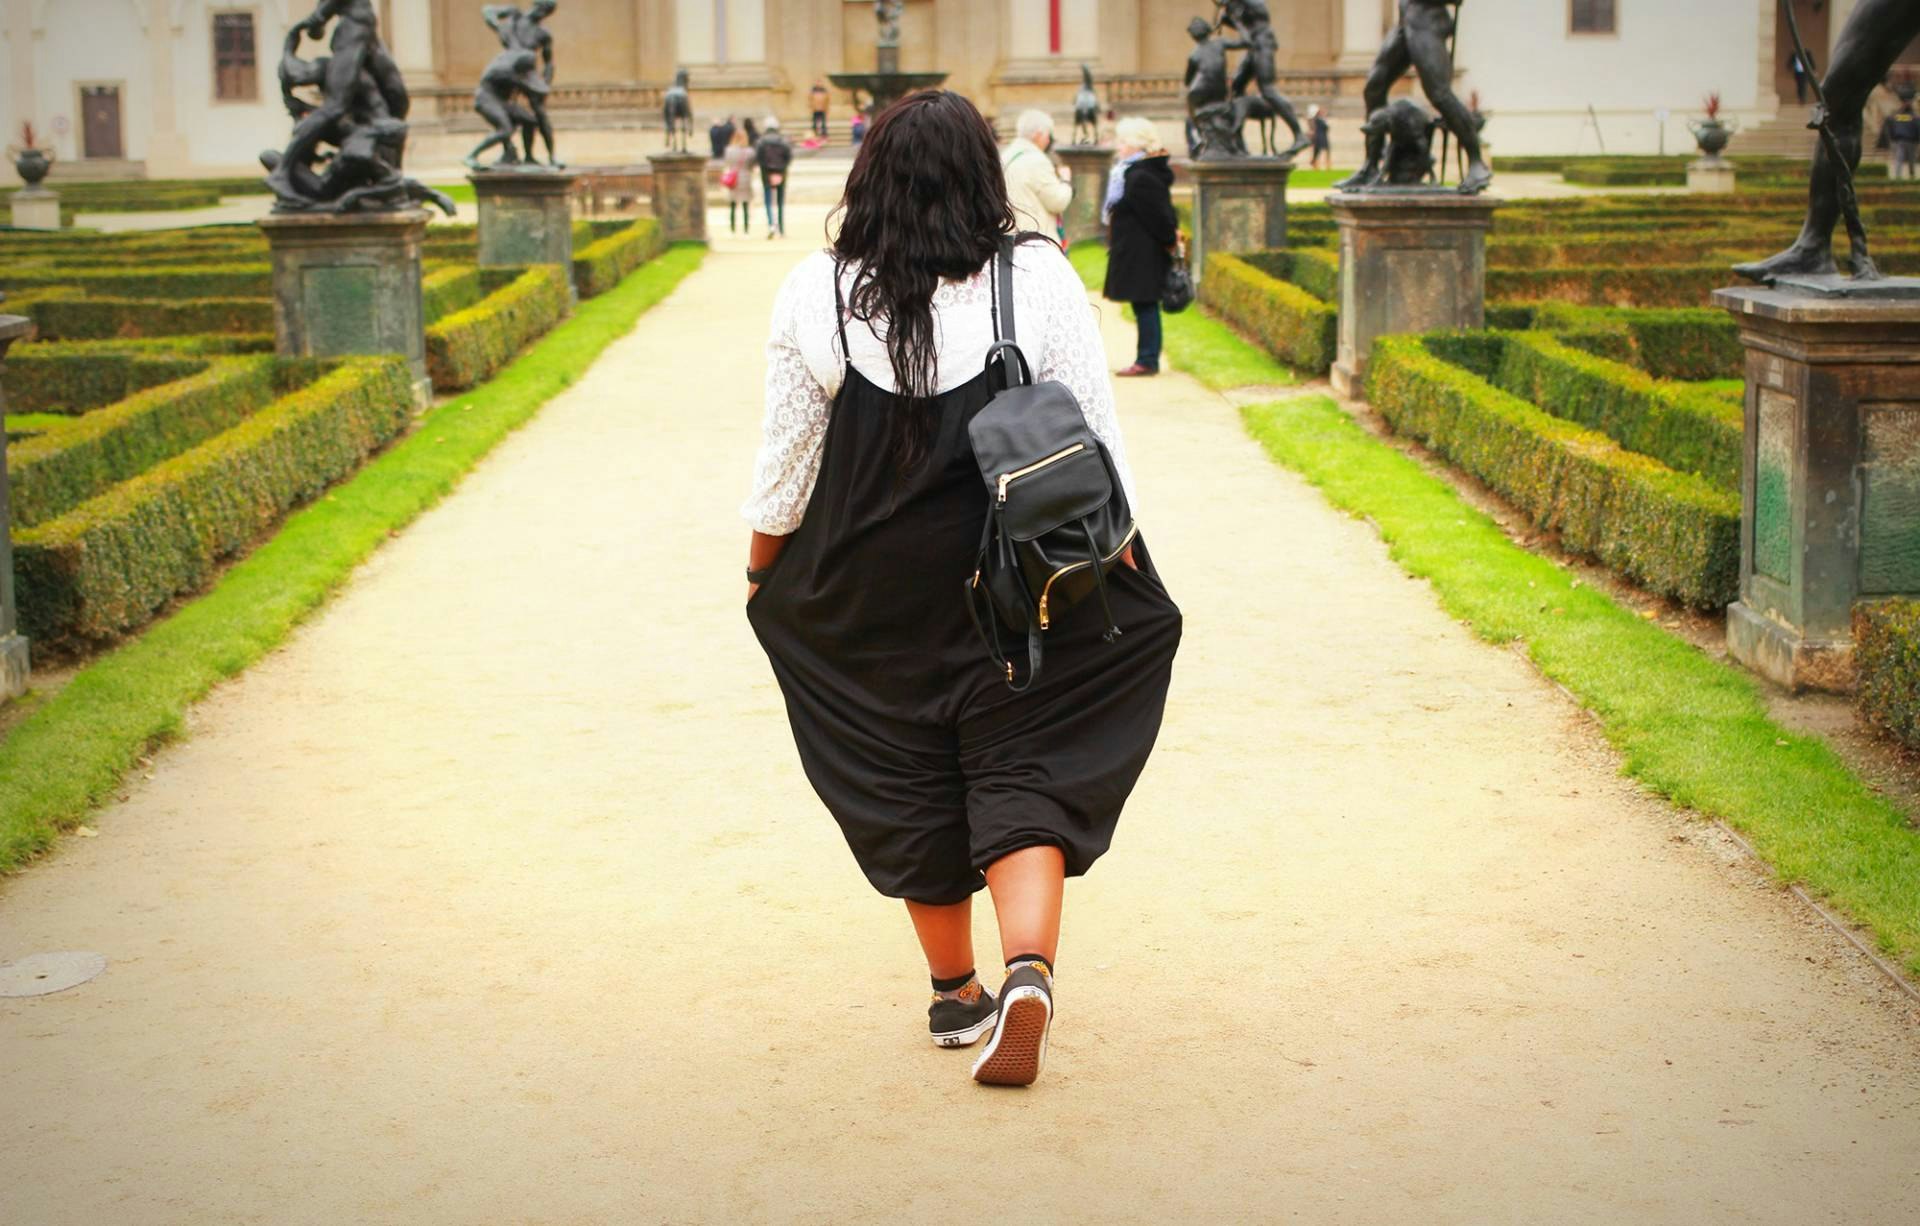 A black girl travelling through Prague. She's wearing a backpack walks along a path in a public garden in Prague. She is facing away from the camera.